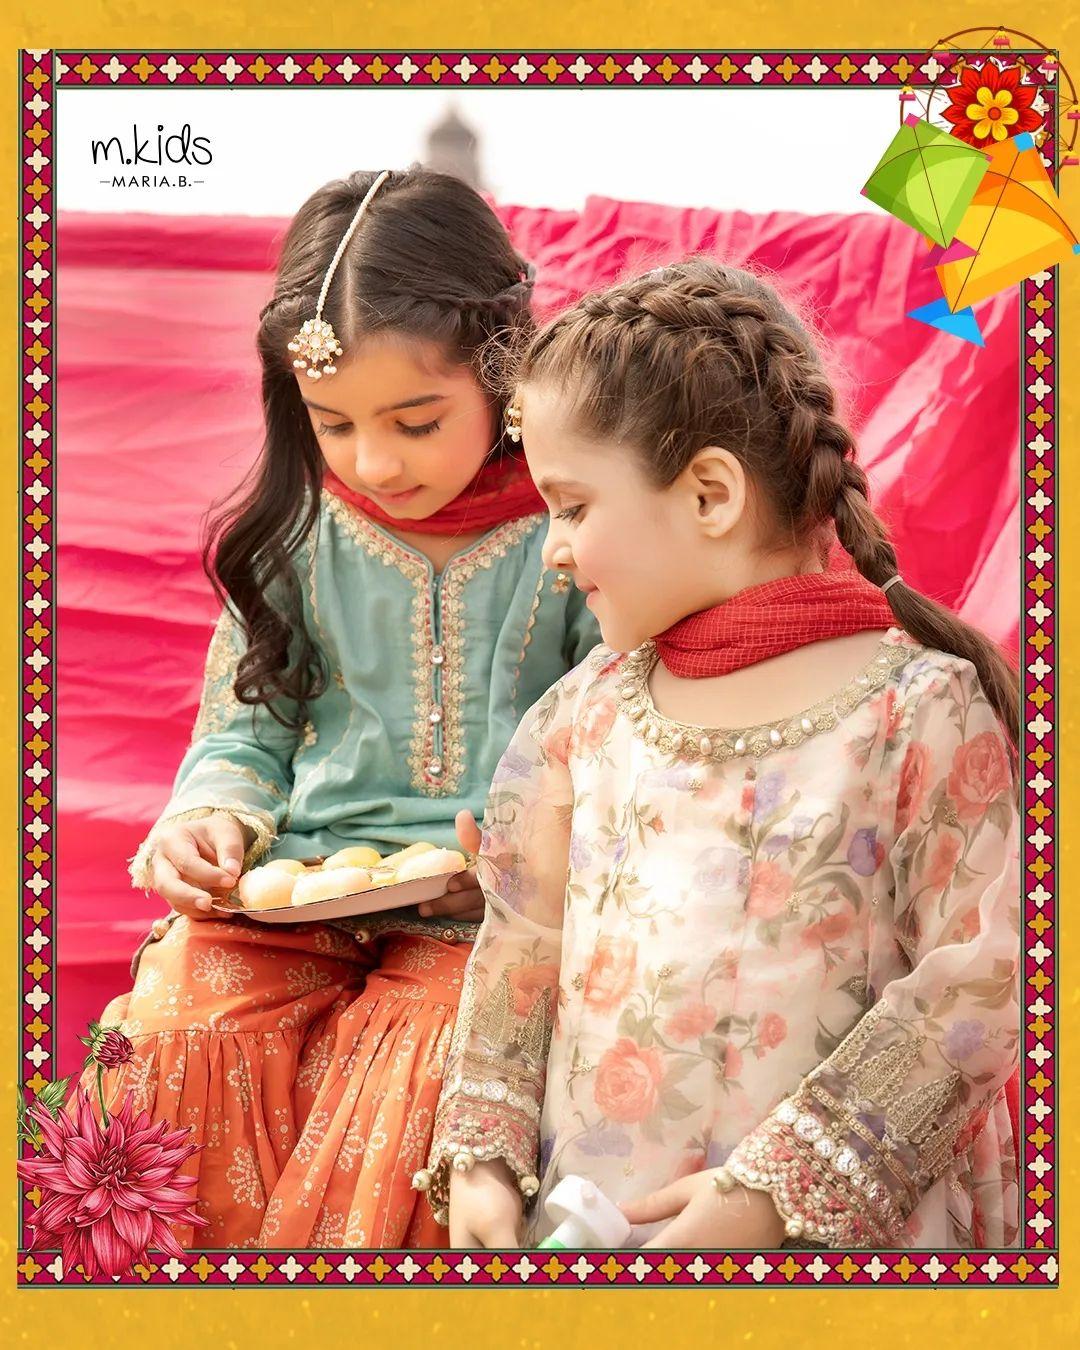 Bursting with fresh shades and floral patterns, the new Maria.B. Kids collection promises carefree sun-drenched days ahead with Jashn-e-Baharan Ready-To-Wear Collection’22 !!

Left Product Code: MKS EF22-06
Right Product Code: MKS EF22-19

Available Now In-Stores &amp; Online at https://www.mariab.pk/kids/kids.html

#MariaB #Mkids #ReadyToWear #MKidsSS22 #SpringSummer2022